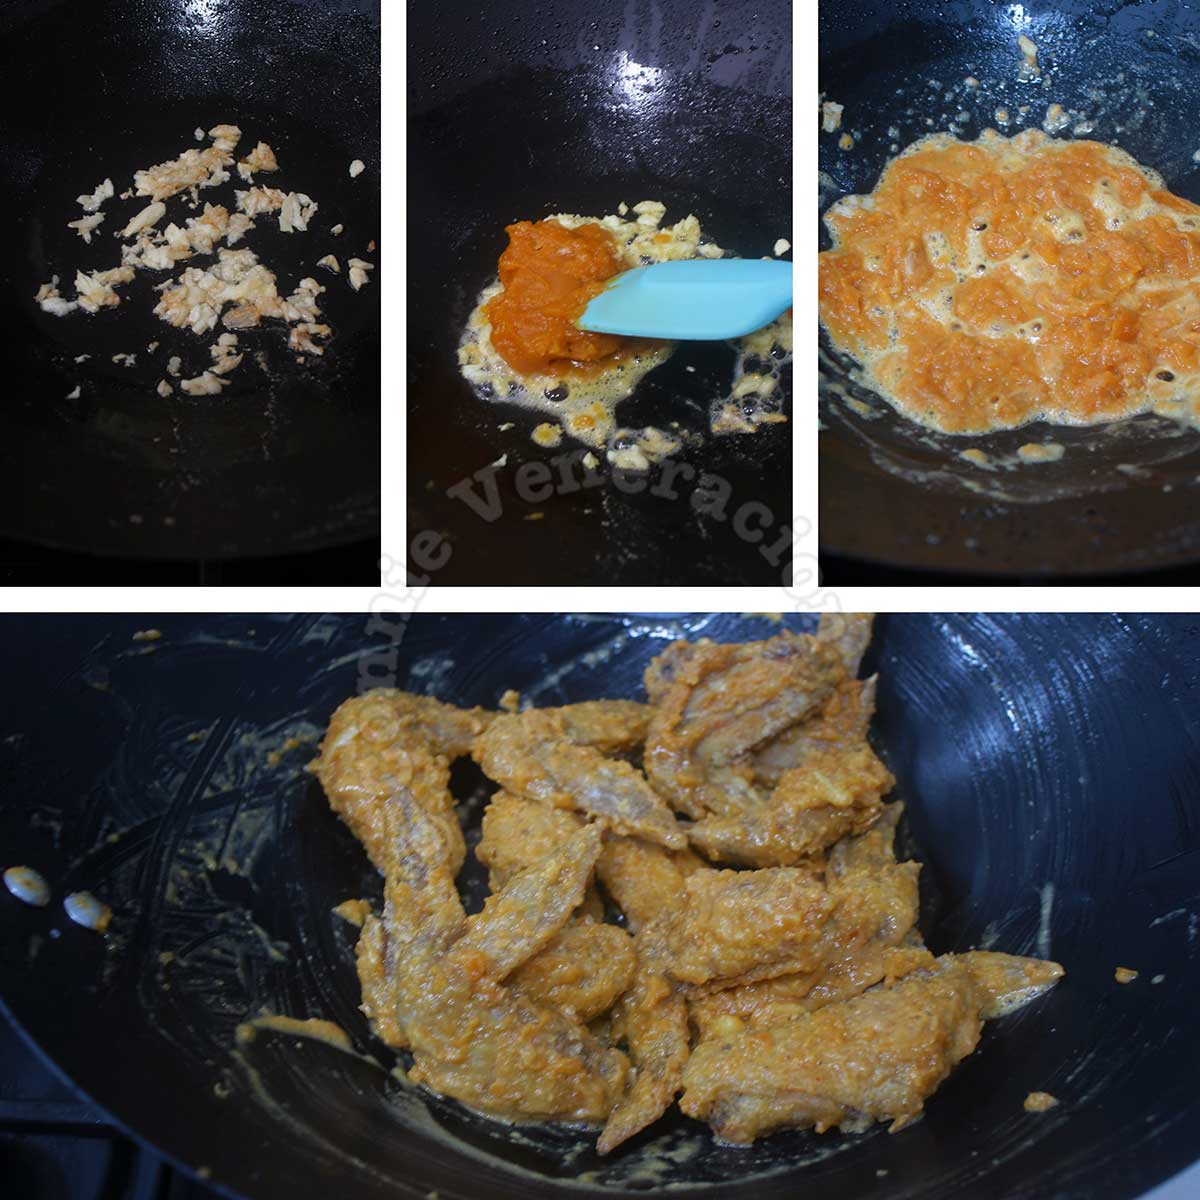 Tossing fried chicken wings in salted duck egg yolk sauce